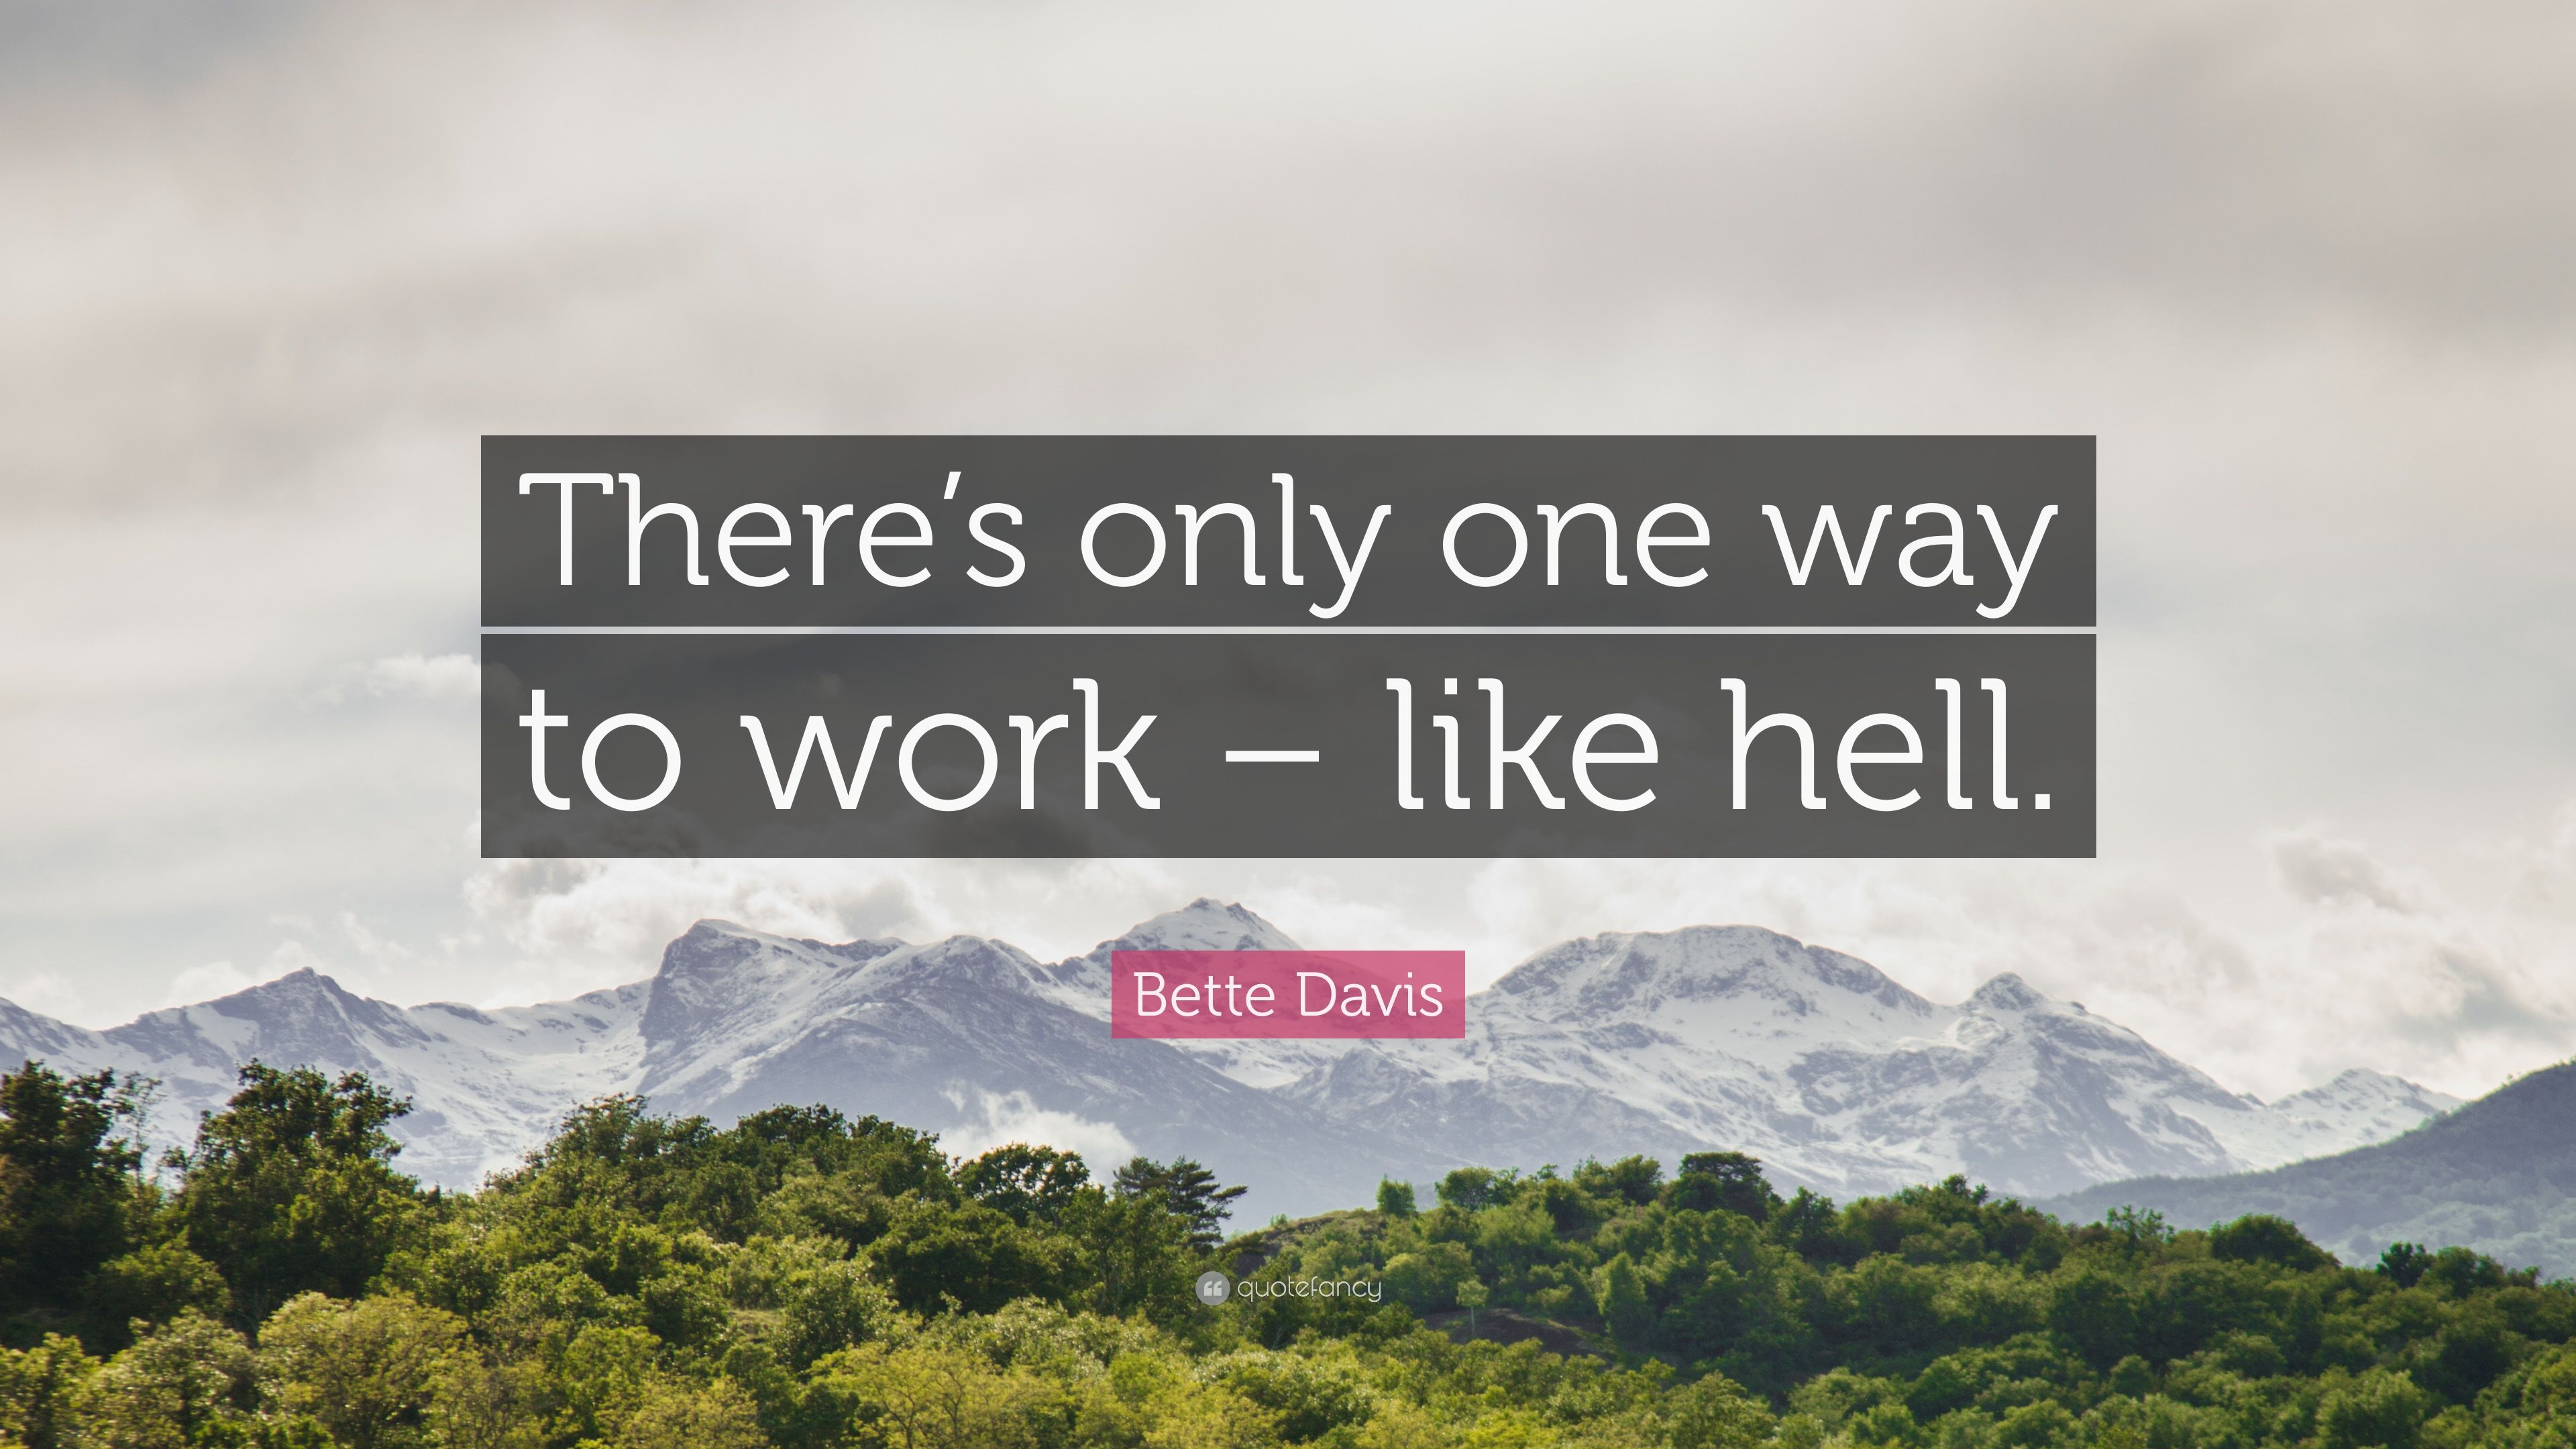 Bette Davis Quote: “There's only one way to work